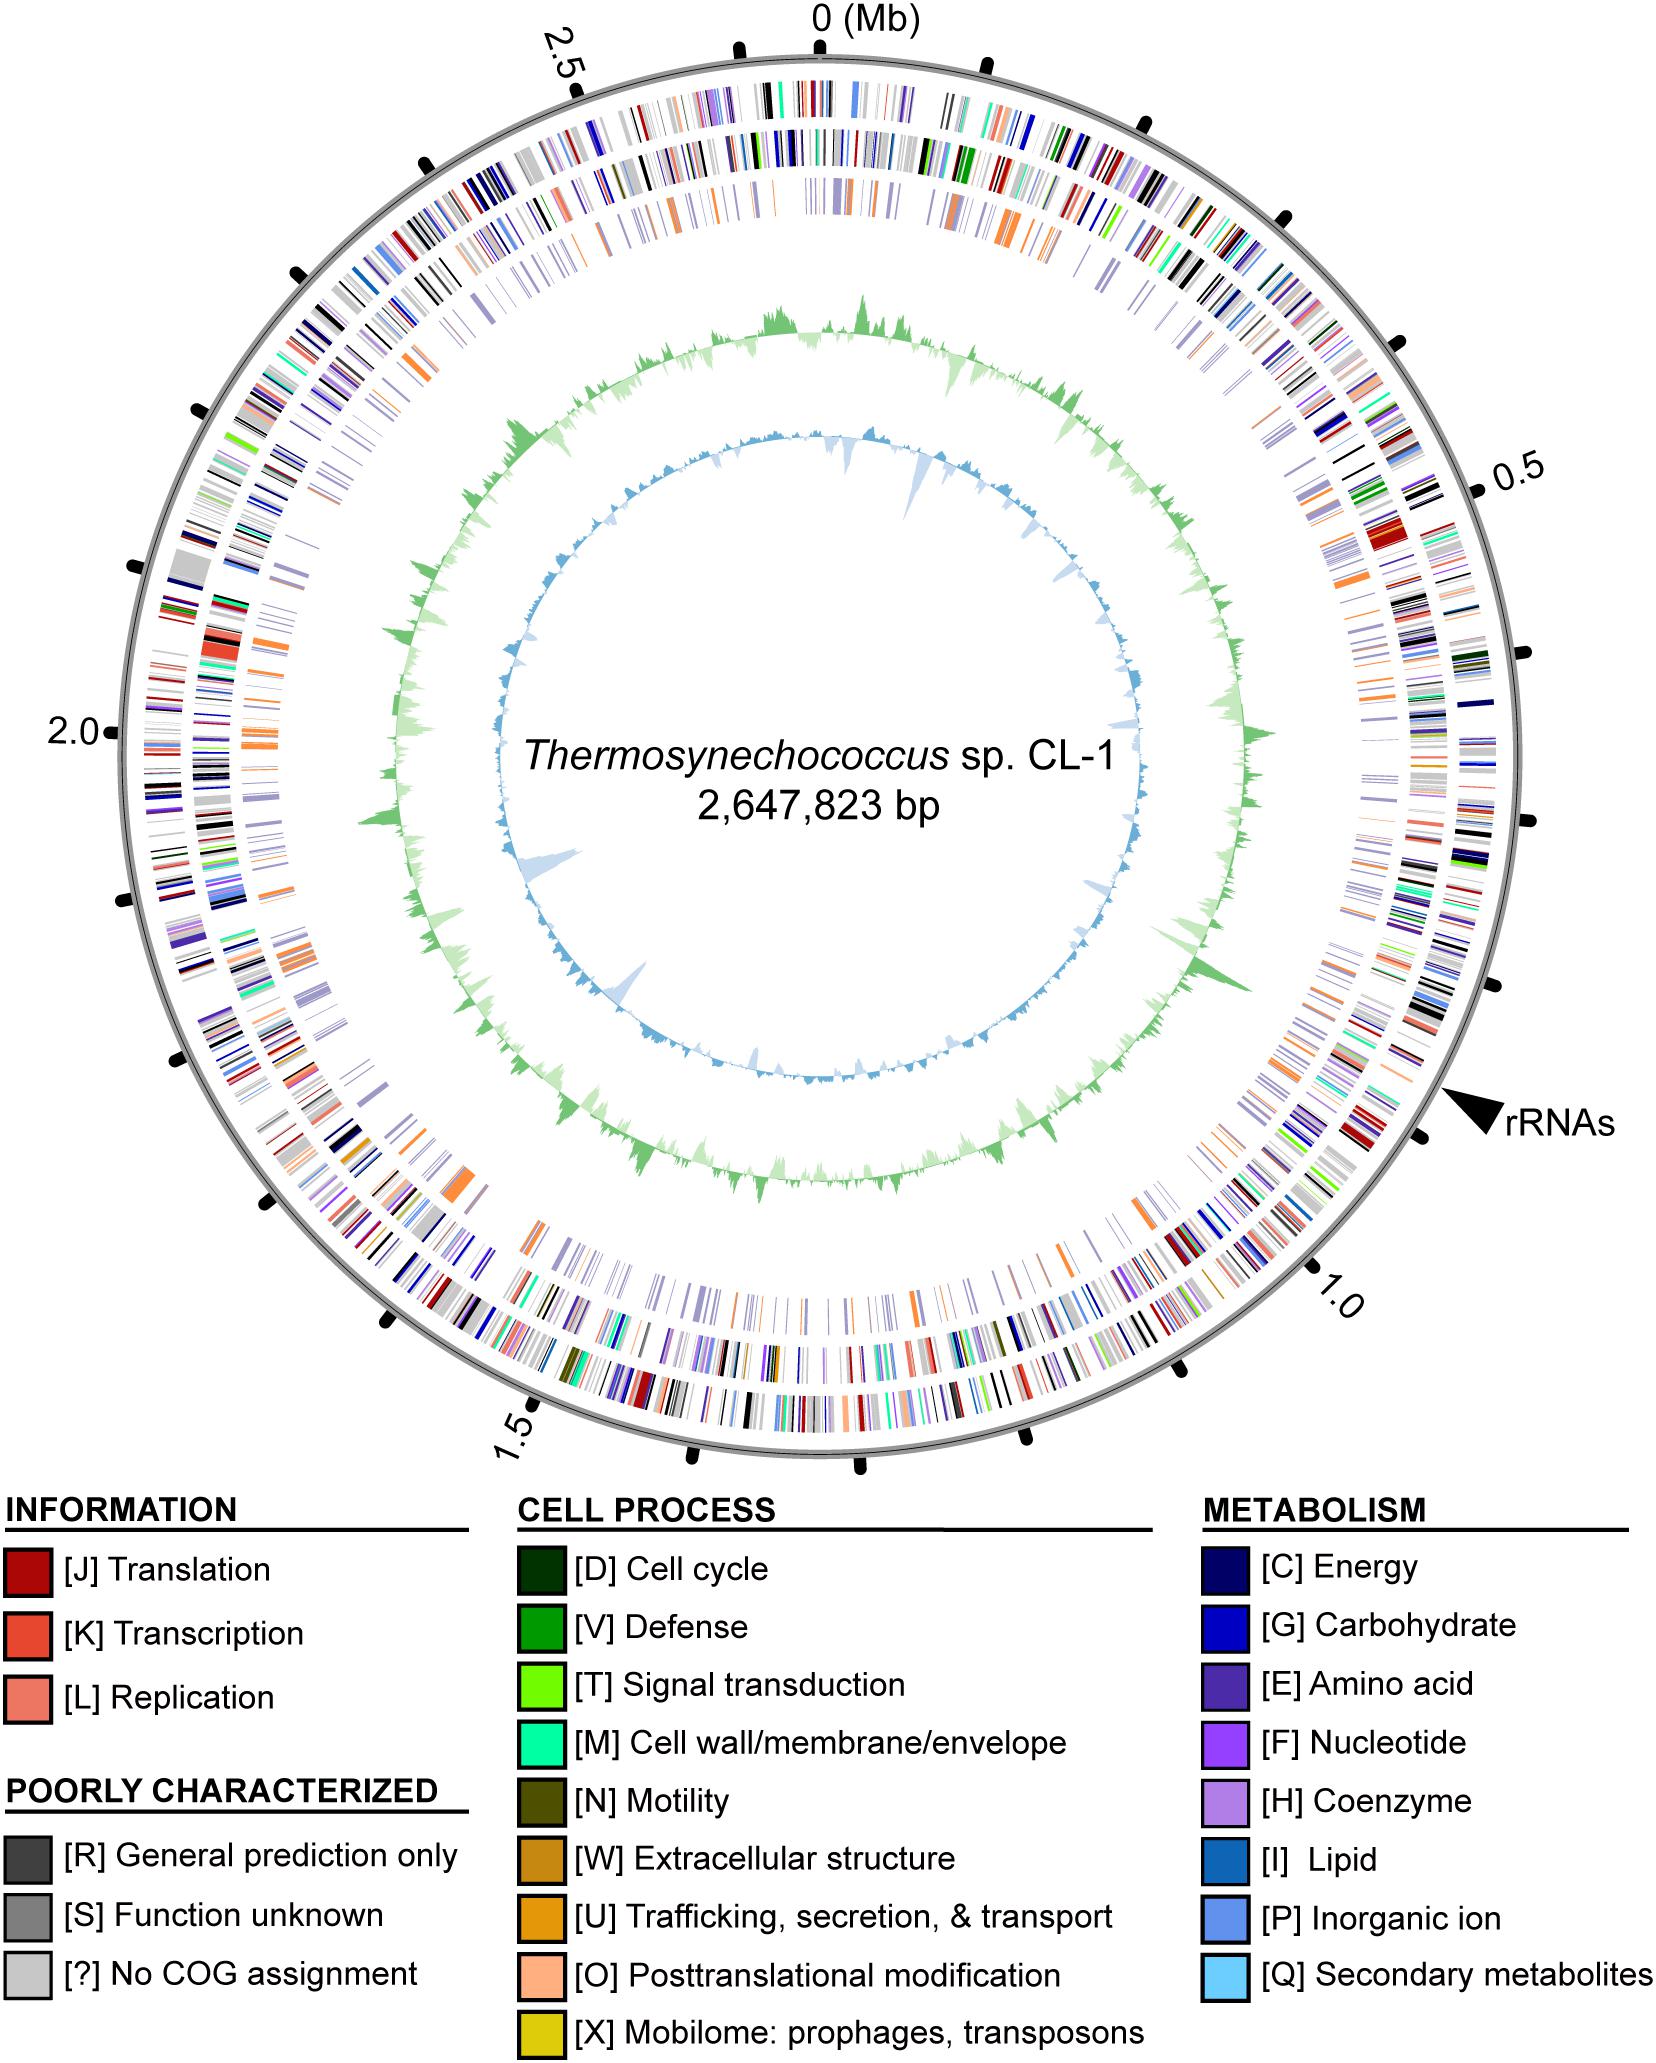 Frontiers Comparative Genomic Analysis Of A Novel Strain Of Taiwan Hot Spring Cyanobacterium Thermosynechococcus Sp Cl 1 Microbiology